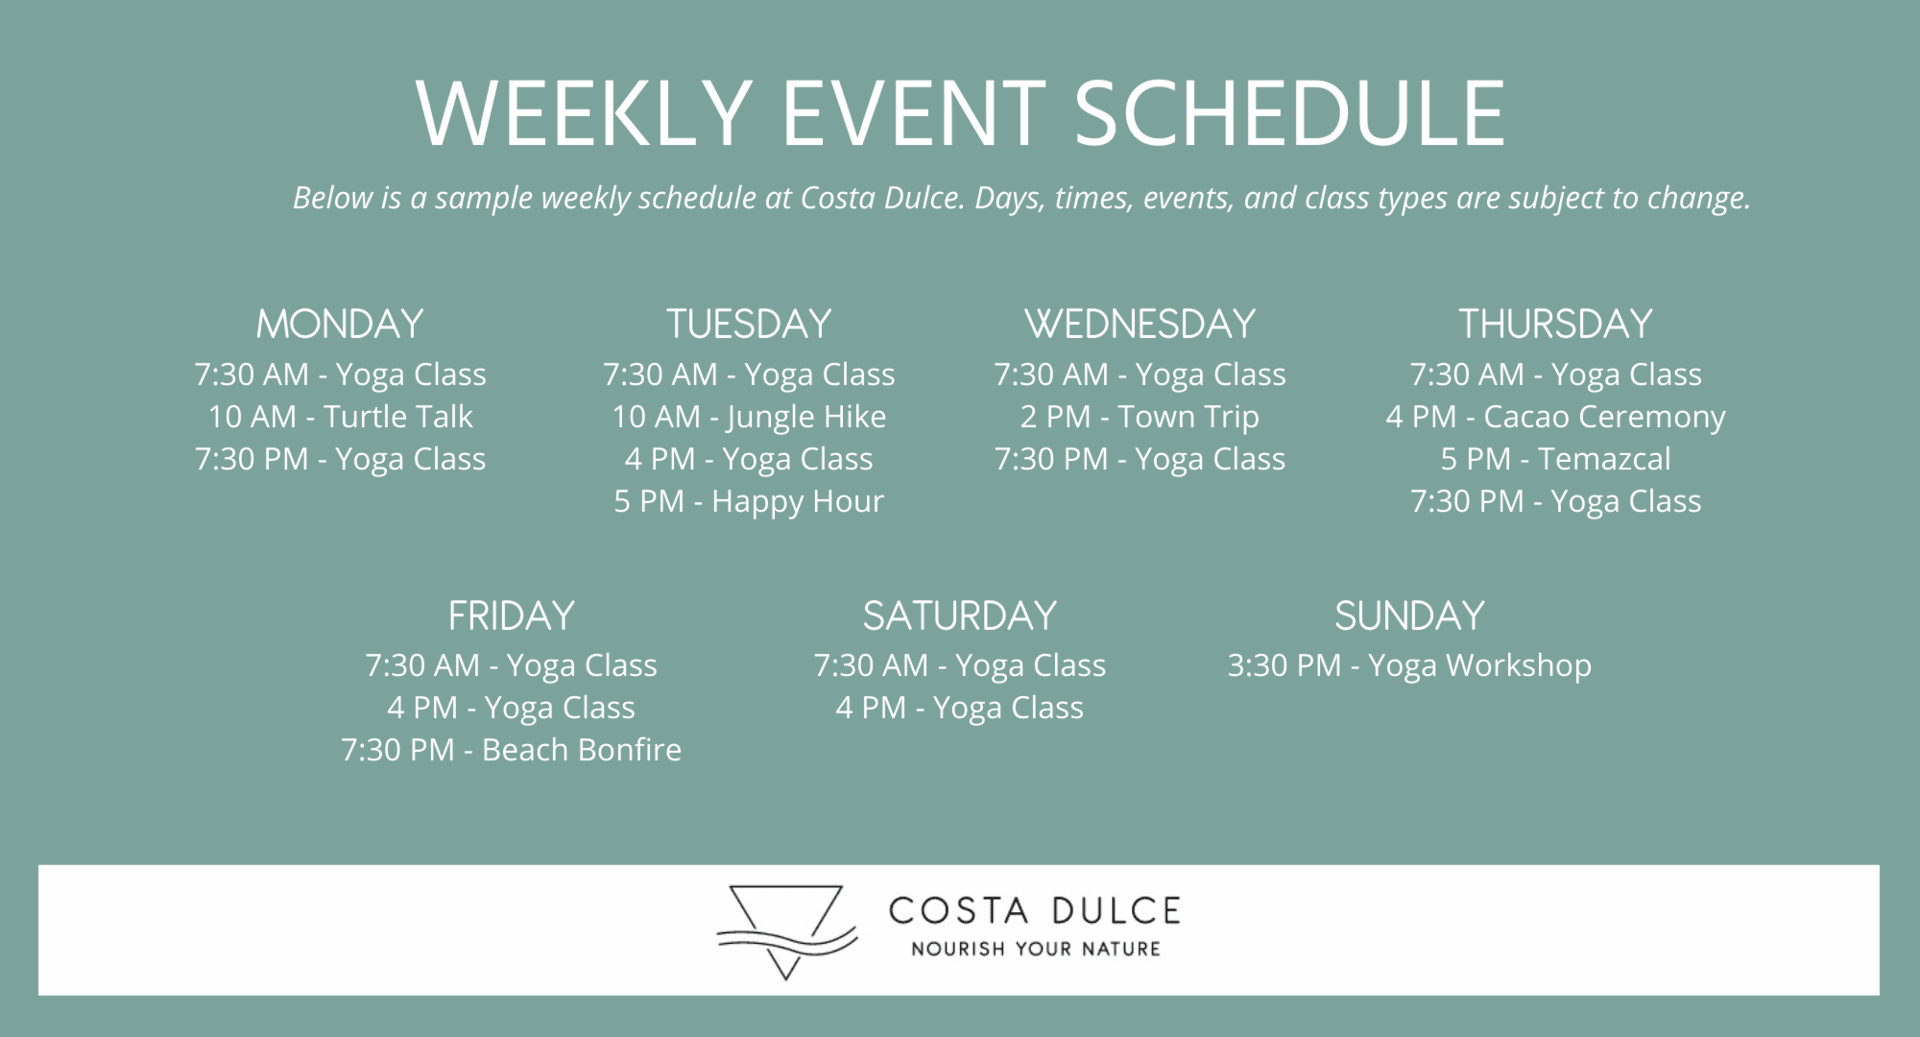 Weekly Schedule at Costa Dulce